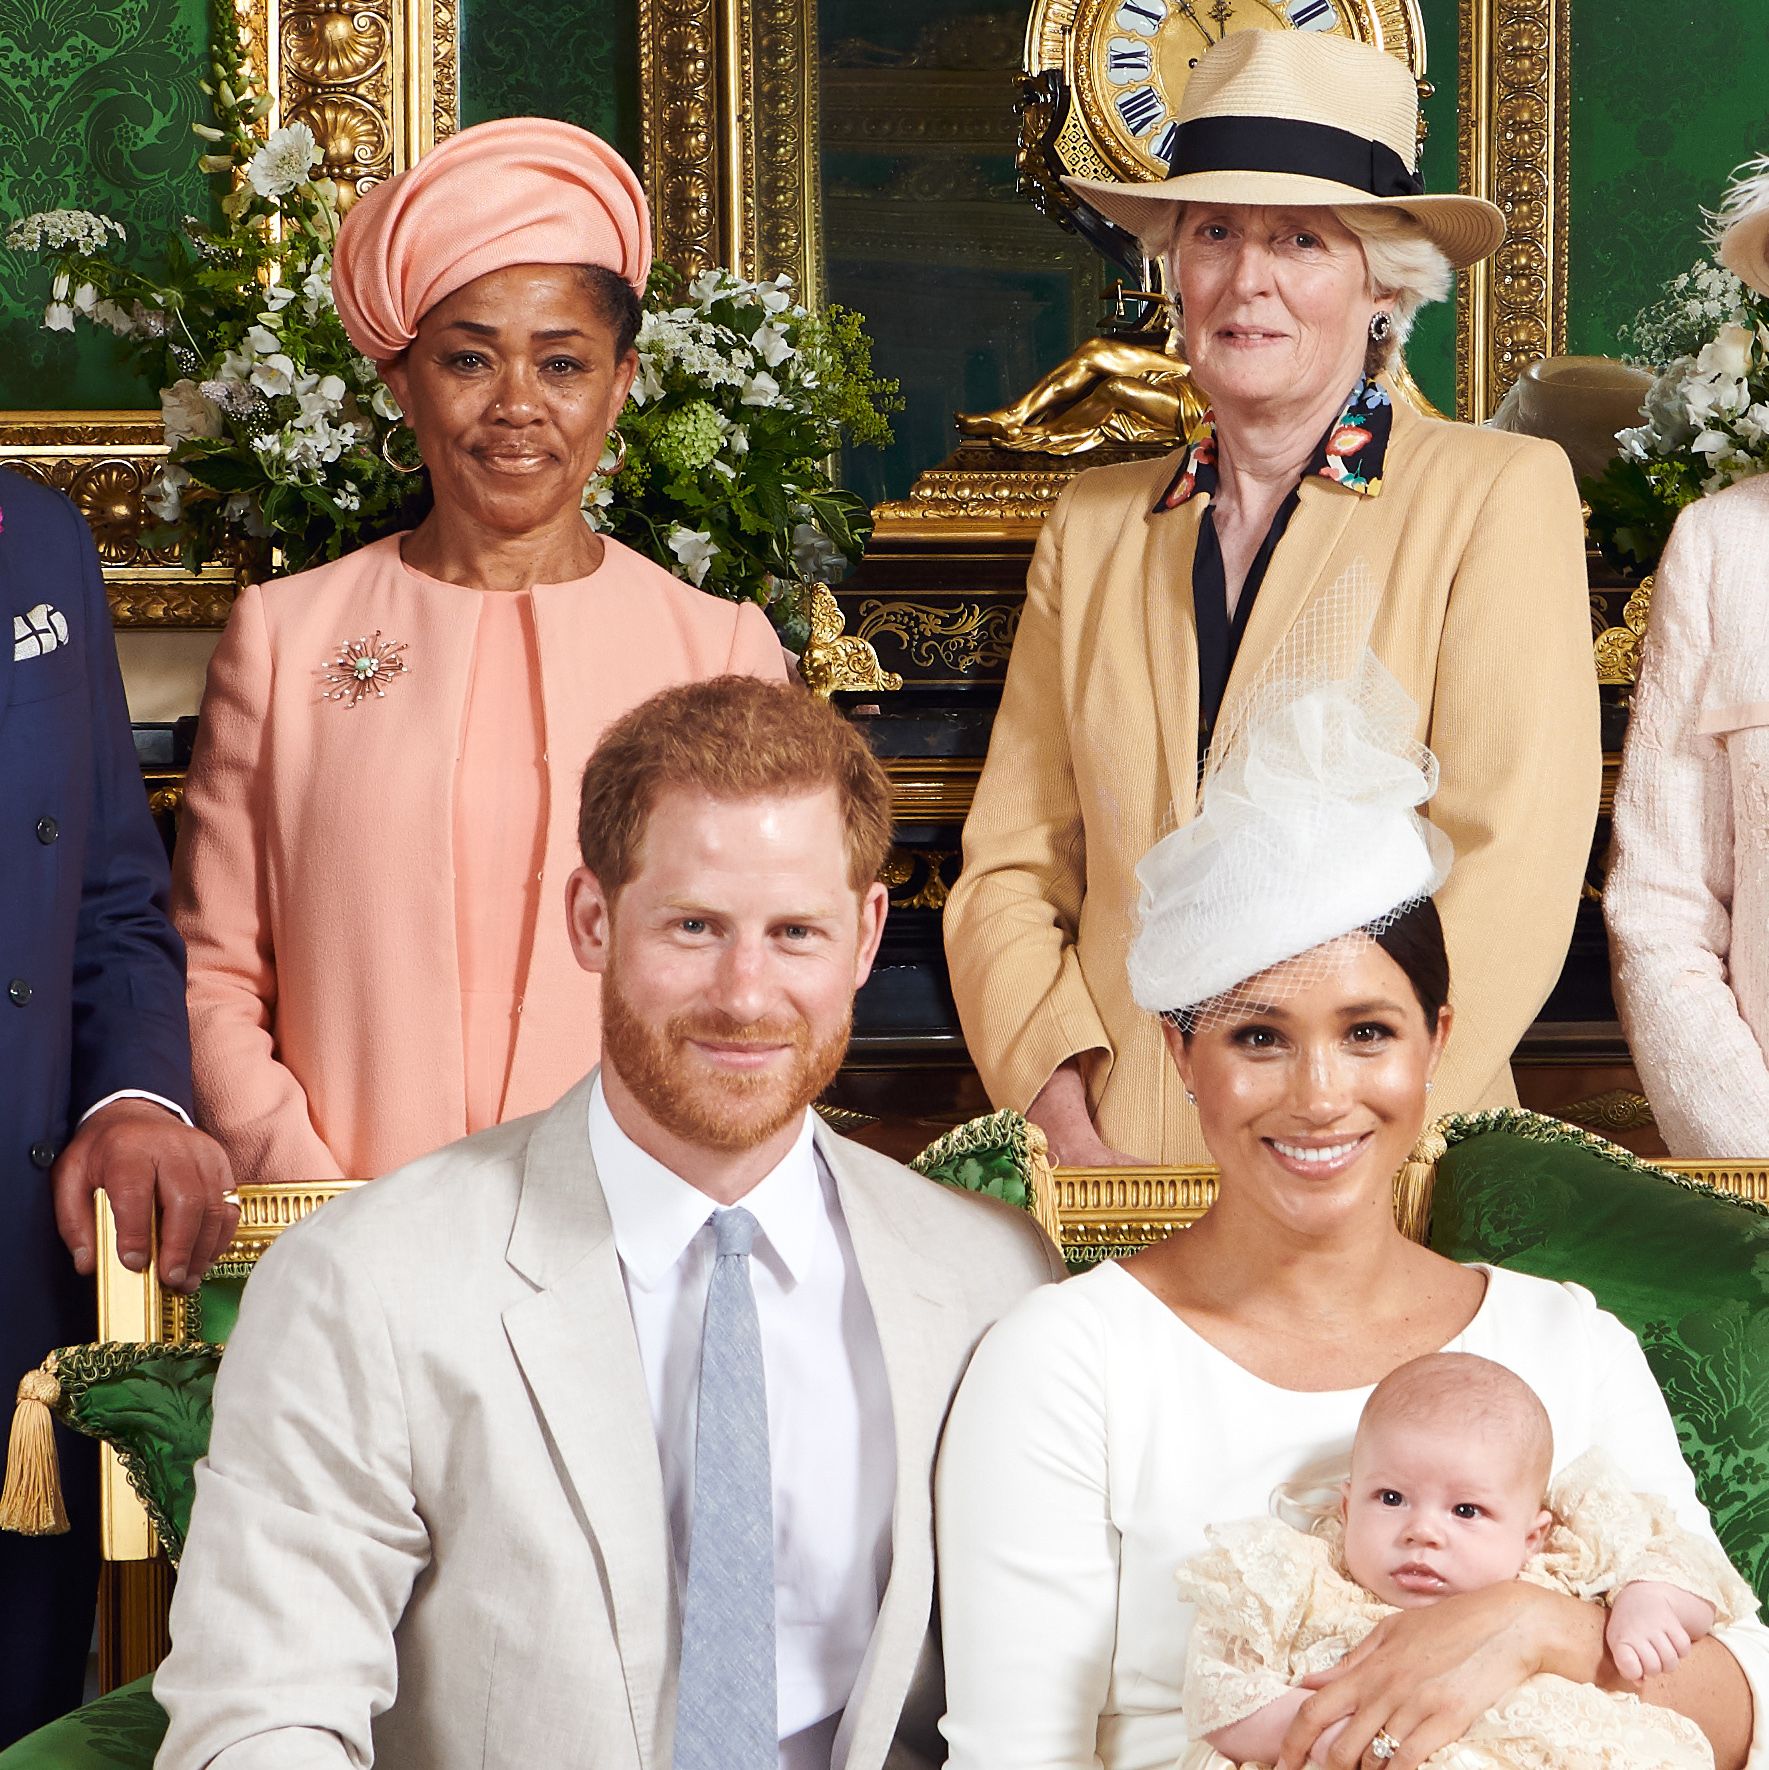 PICS: Archie's official christening photos with royal family have been  released | Life